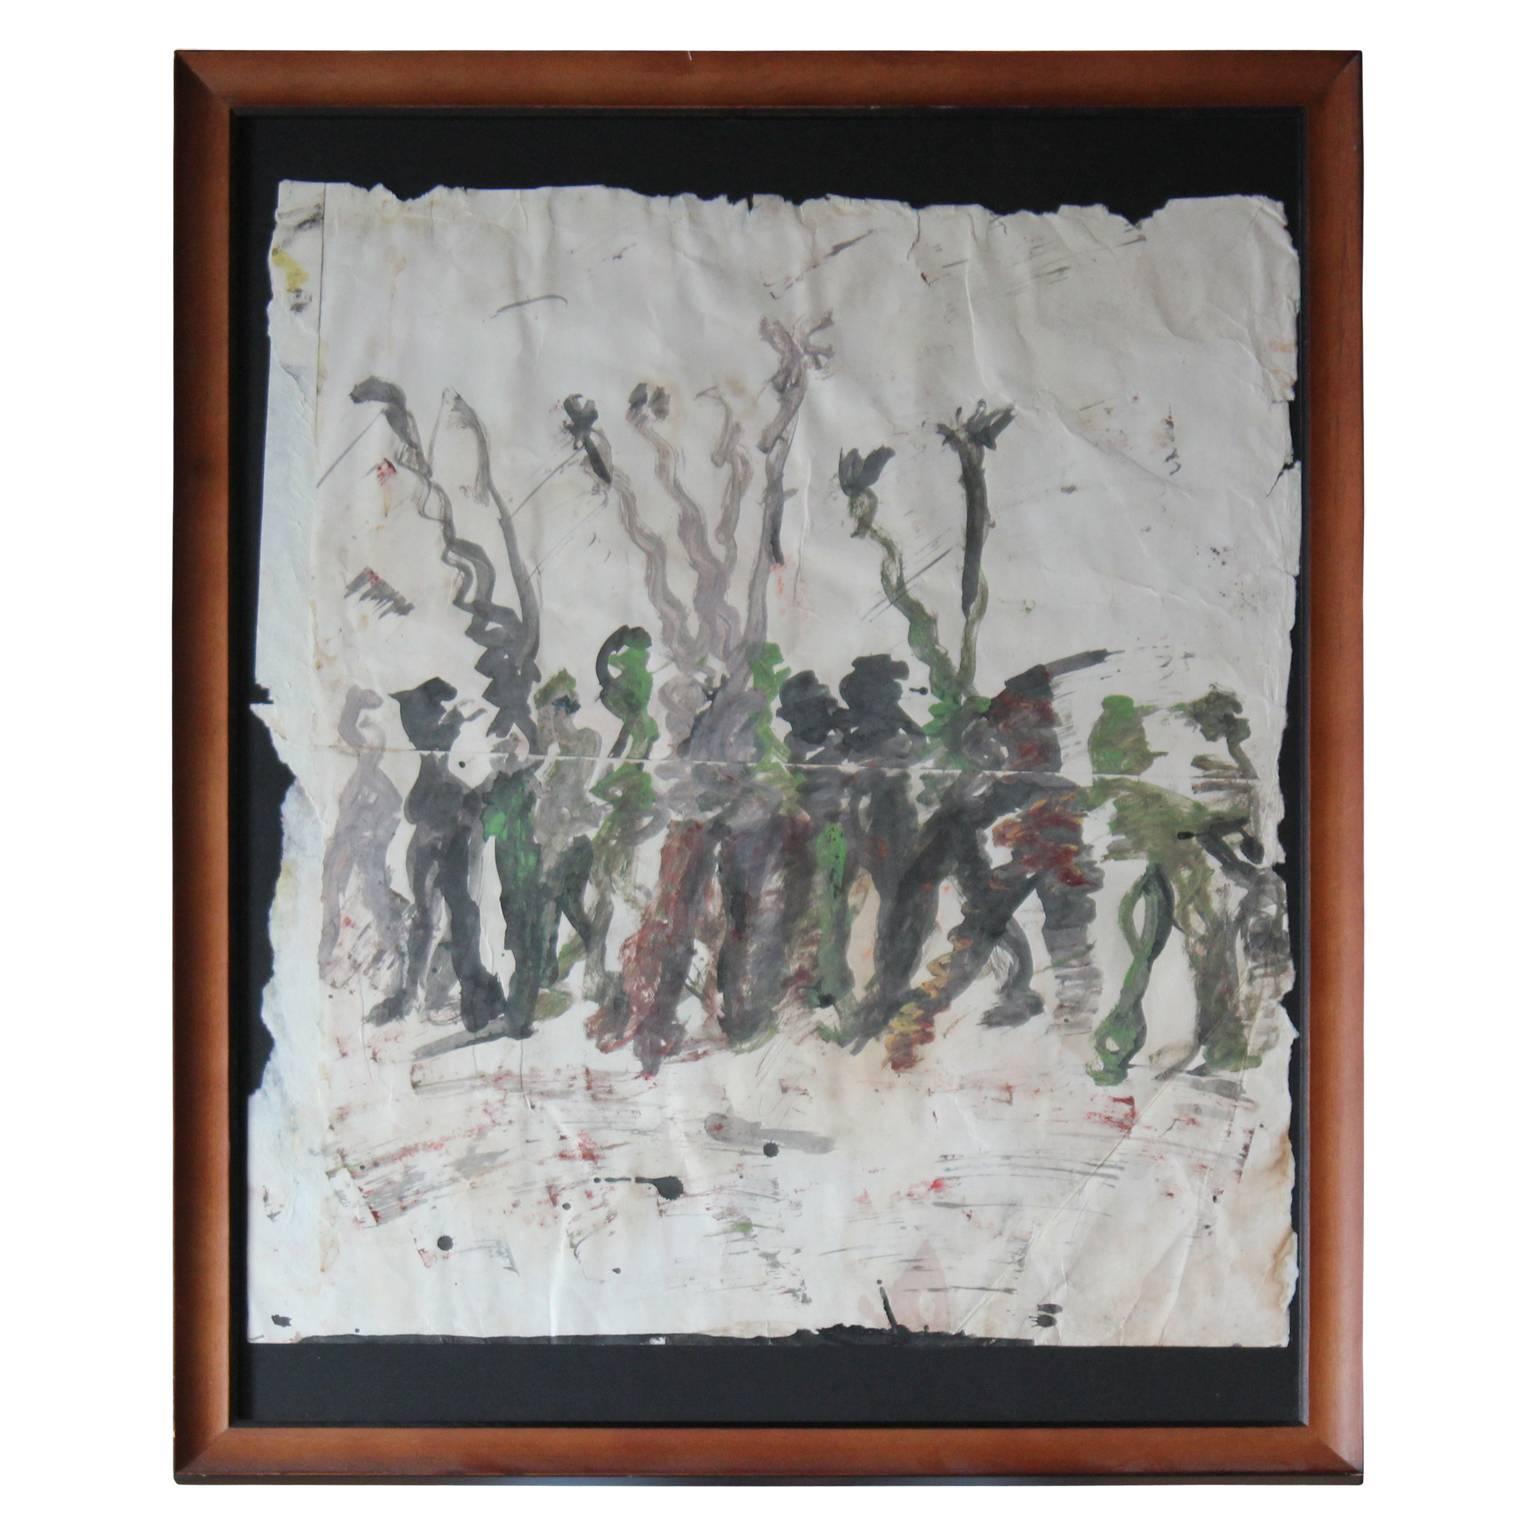 Purvis Young Abstract Painting - People in a Line on Paper